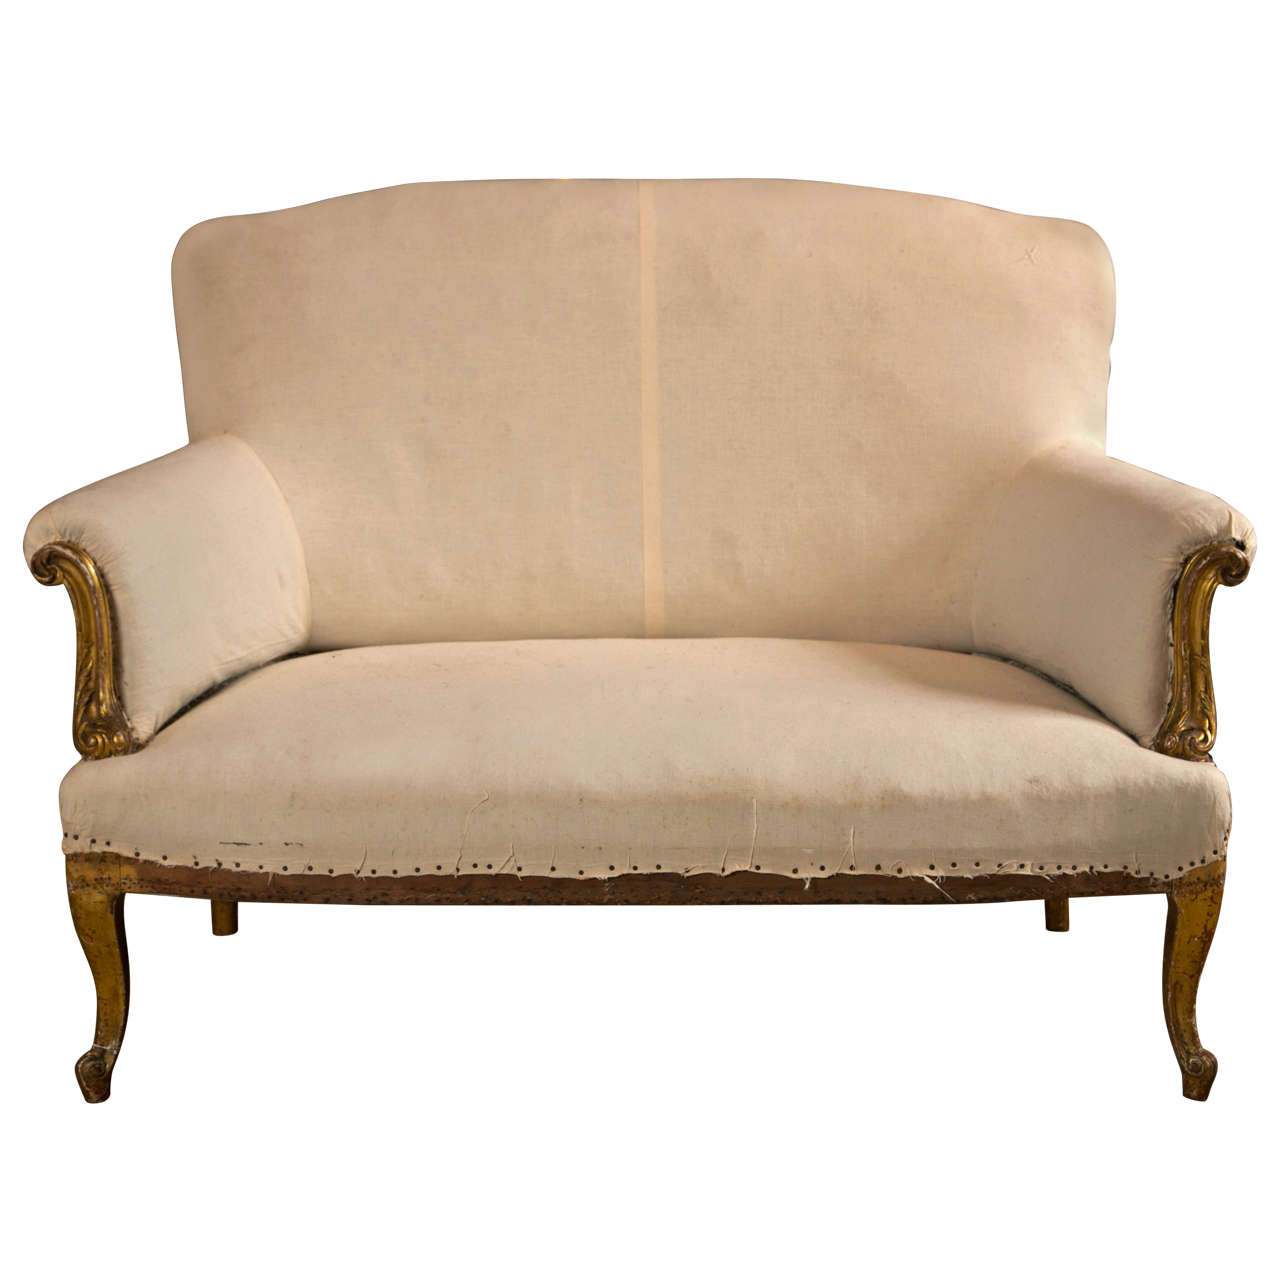 French Carved Giltwood Sofa with Scroll Arms and Cabriole Legs at 1stdibs